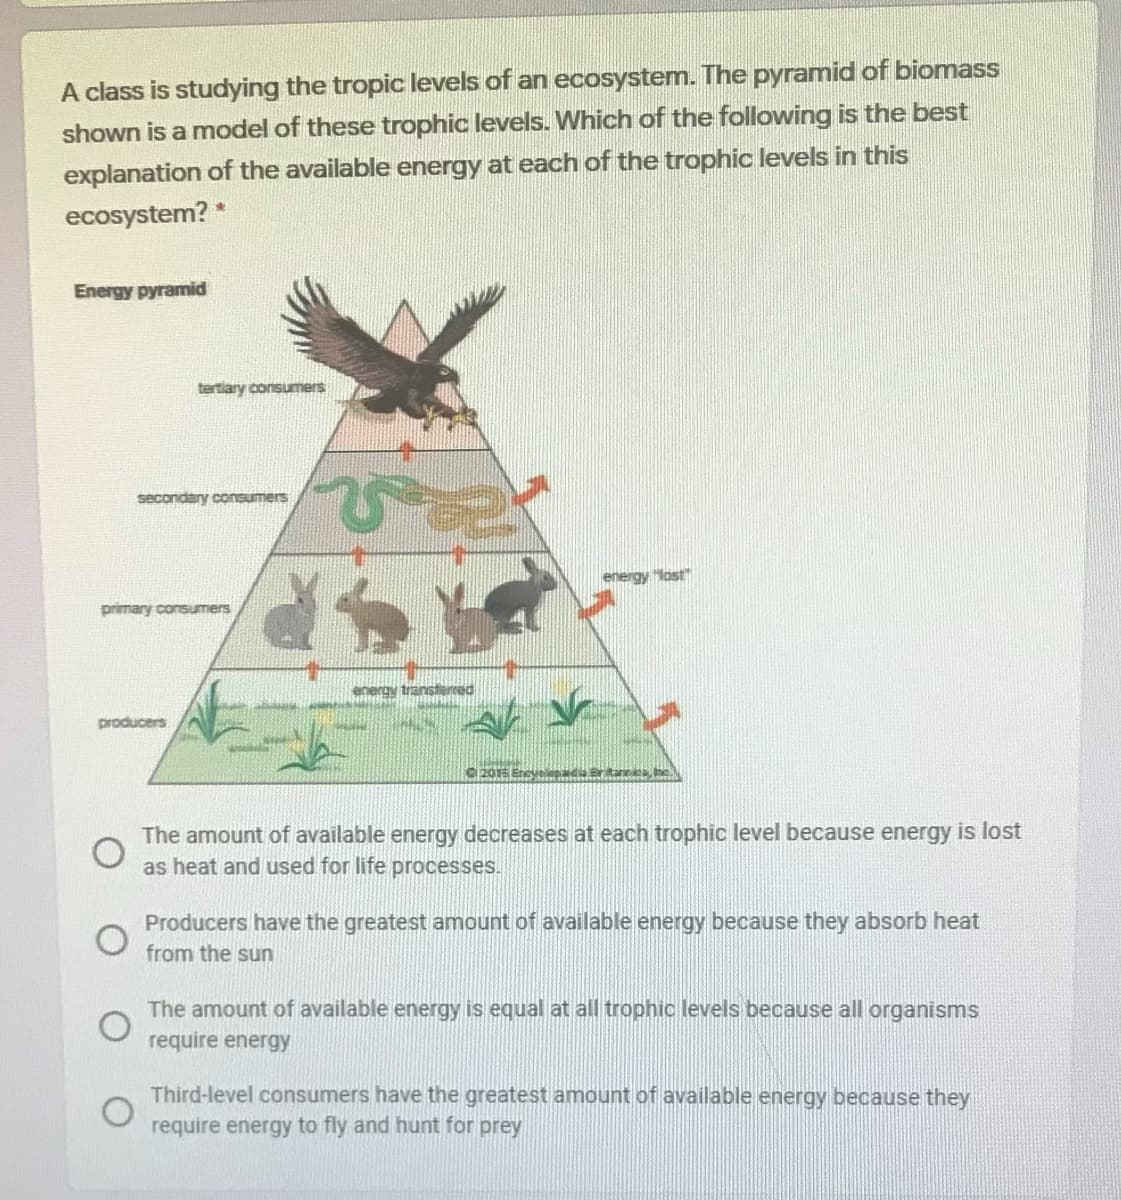 A class is studying the tropic levels of an ecosystem. The pyramid of biomass
shown is a model of these trophic levels. Which of the following is the best
explanation of the available energy at each of the trophic levels in this
ecosystem? *
Energy pyramid
tertiary consumers
secondary consumers
energy "lost
primary consumers
energy transfered
producers
C2015 Encyada Brtanes be
The amount of available energy decreases at each trophic level because energy is lost
as heat and used for life processes.
Producers have the greatest amount of available energy because they absorb heat
from the sun
The amount of available energy is equal at all trophic levels because all organisms
require energy
Third-level consumers have the greatest amount of available energy because they
require energy to fly and hunt for prey
